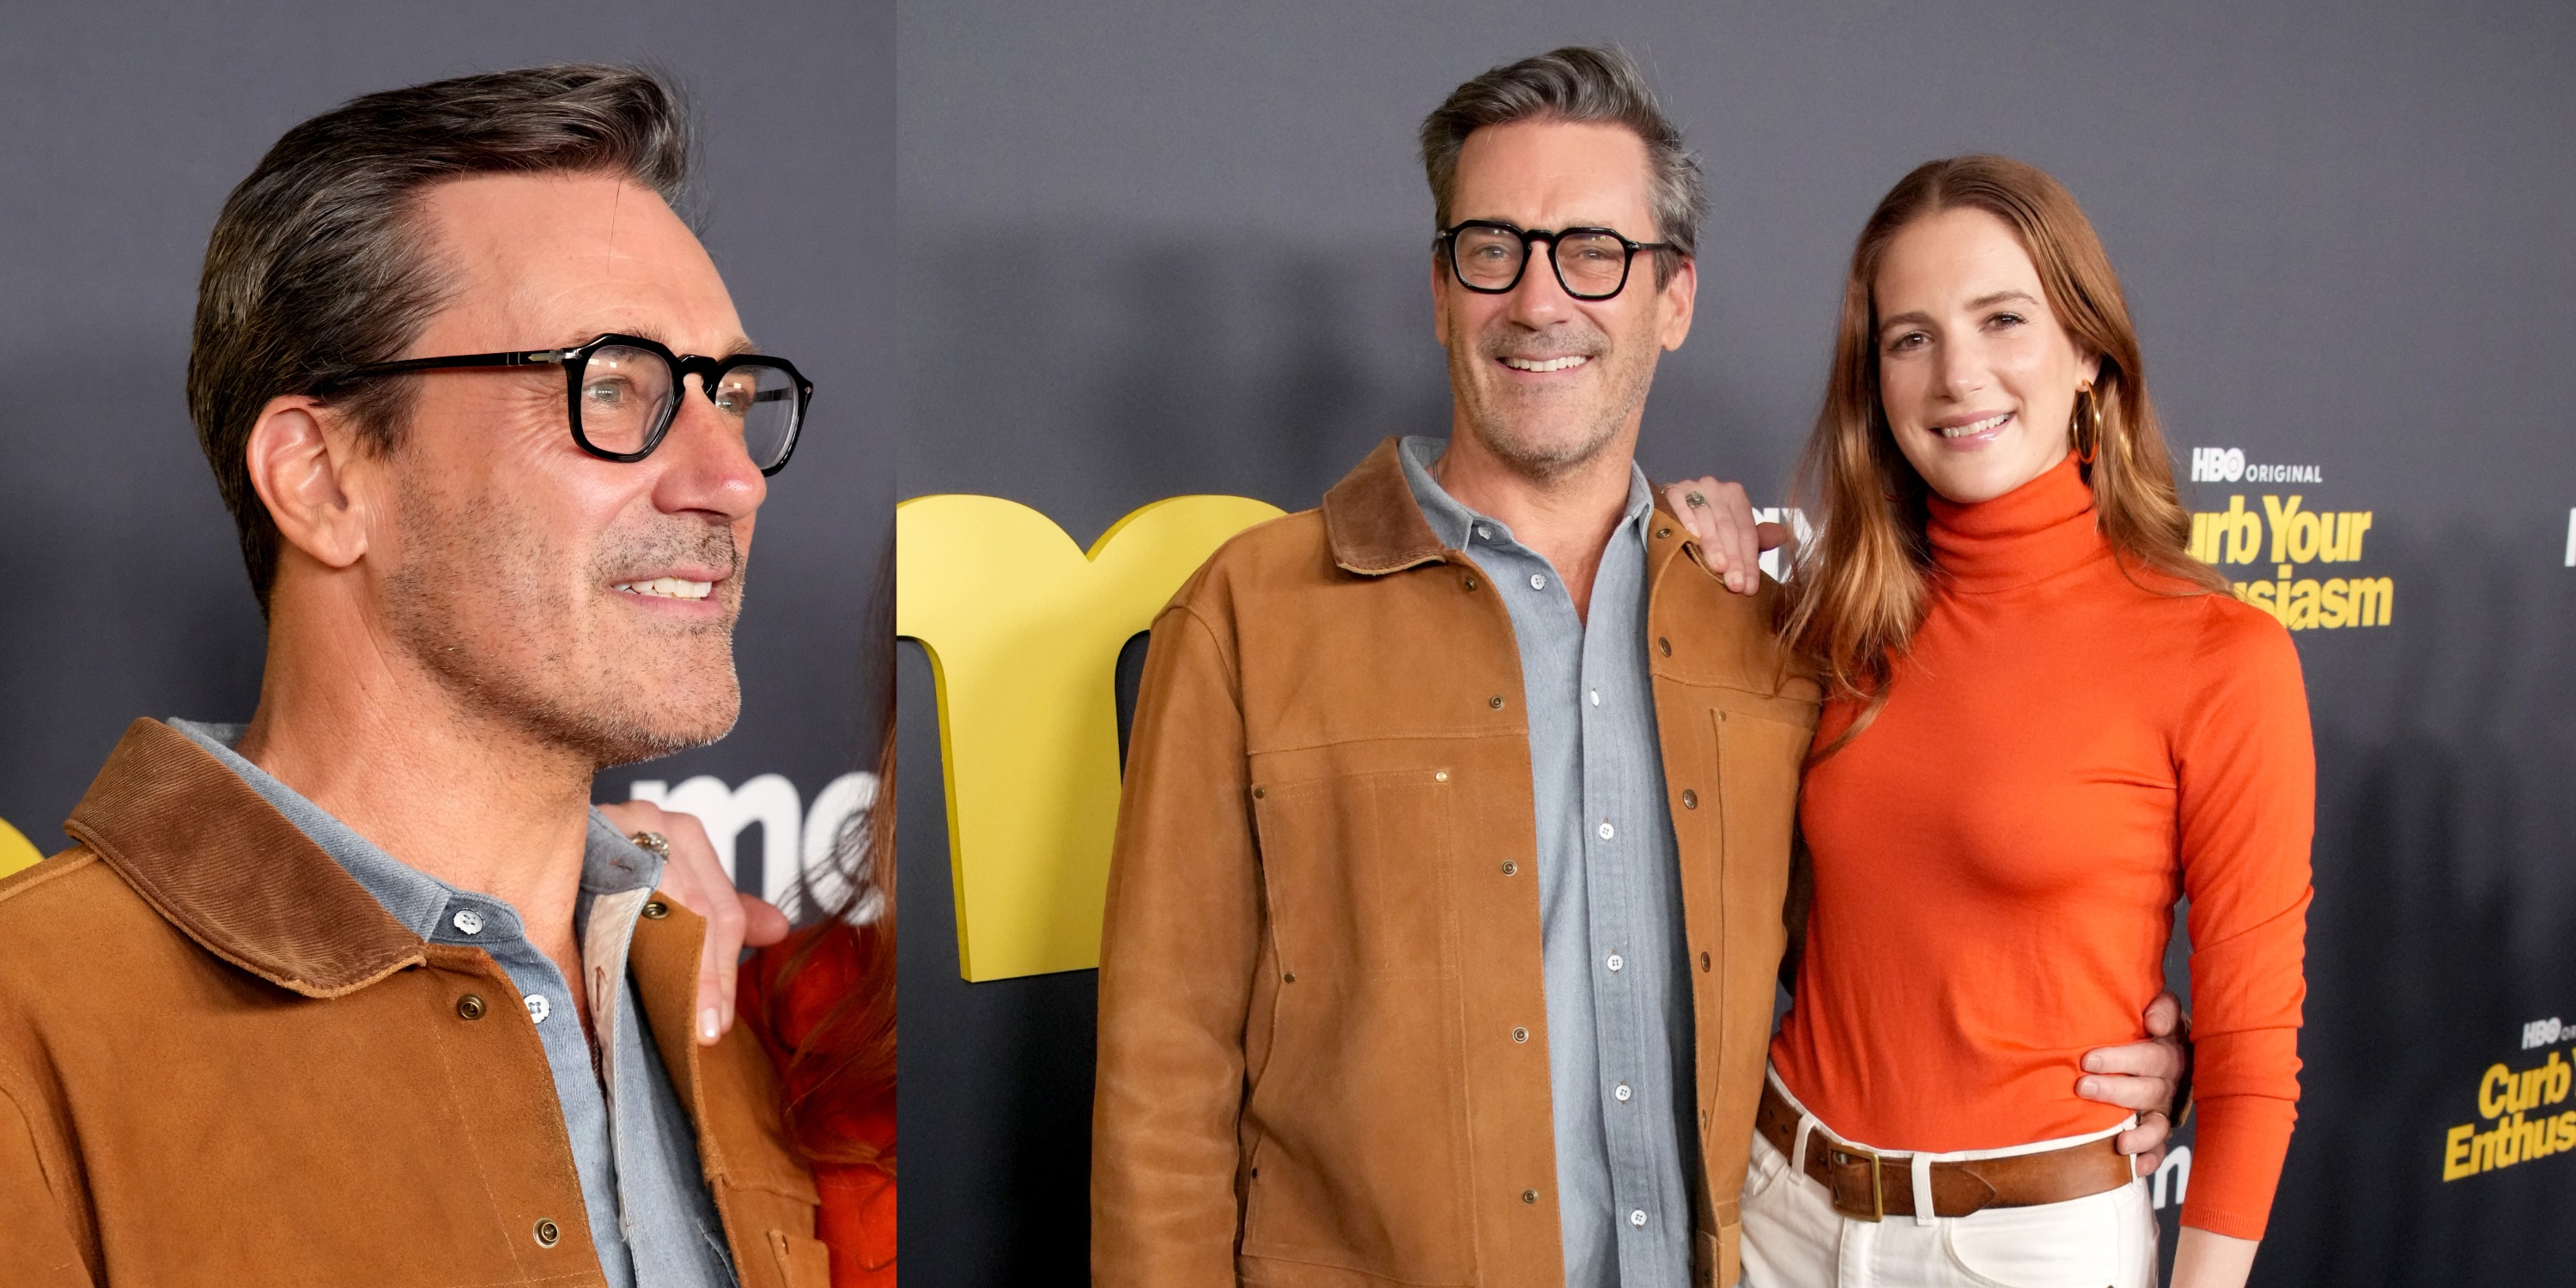 Actor Jon Hamm and wife Anna Osceola, wearing an orange turtleneck, smile at the Curb Your Enthusiasm Season 12 premiere